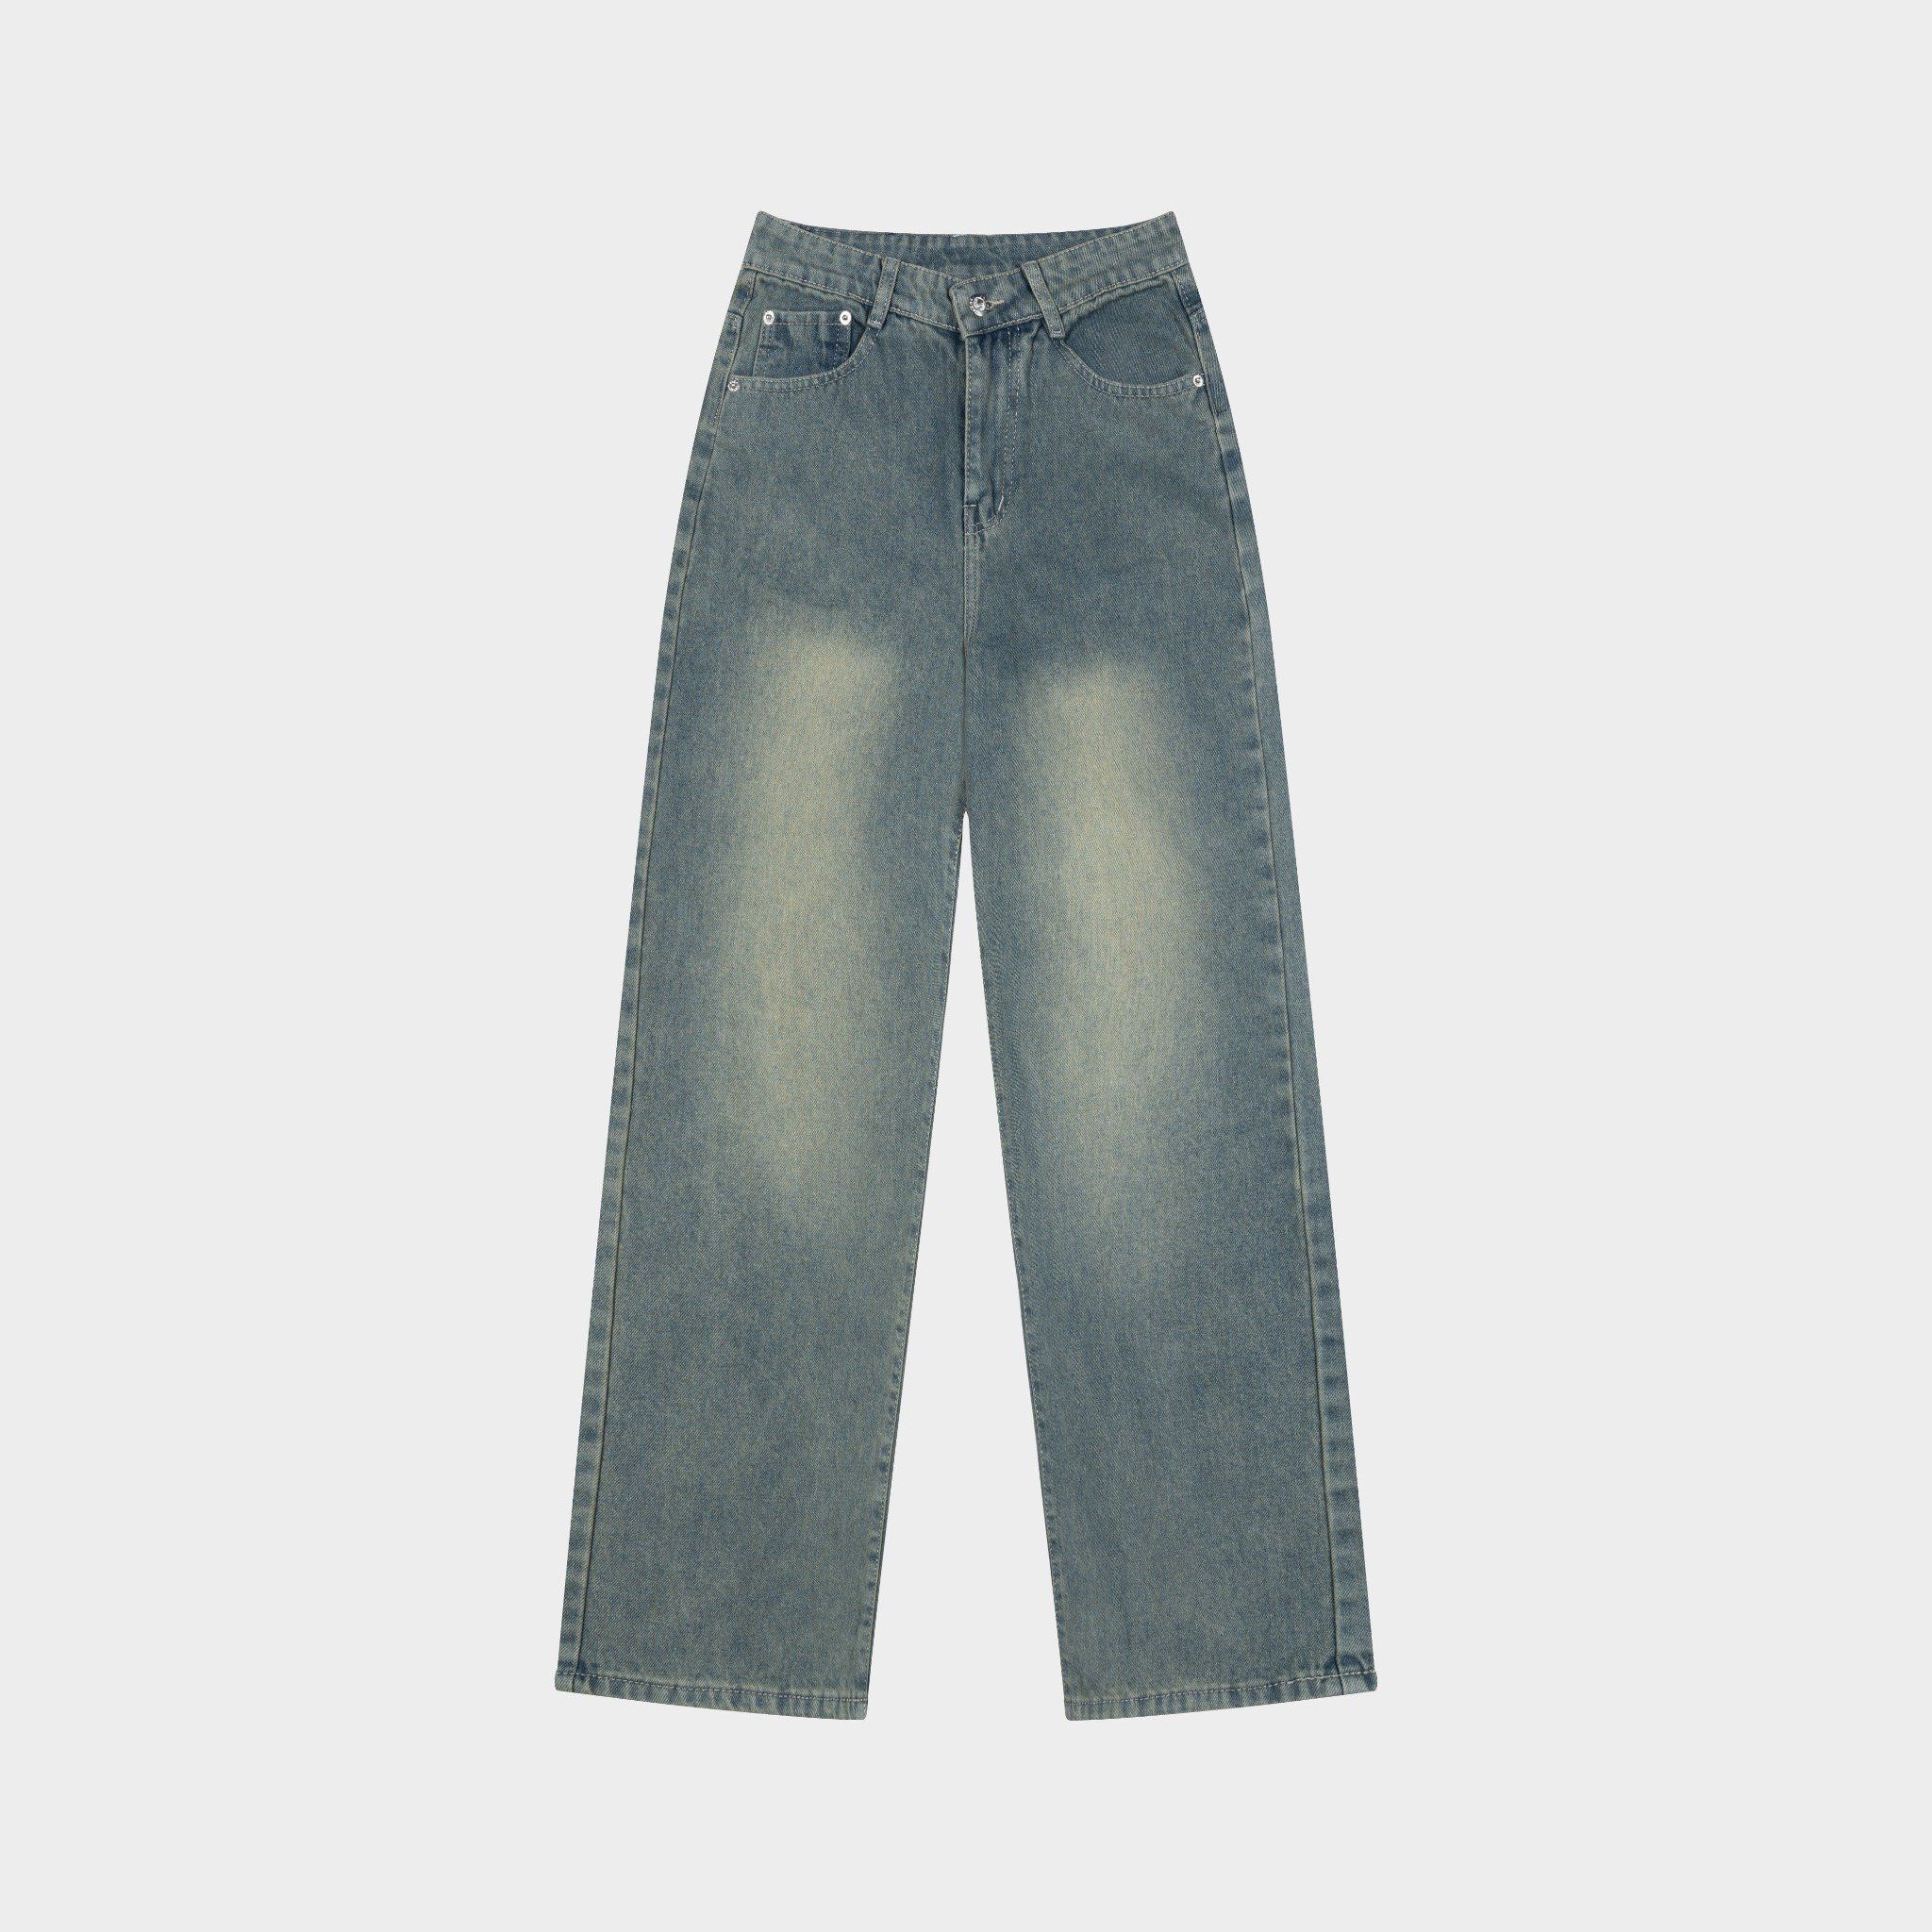  Outerity Jean Wash Cạp Cao Form Unisex /  Xanh Vàng 